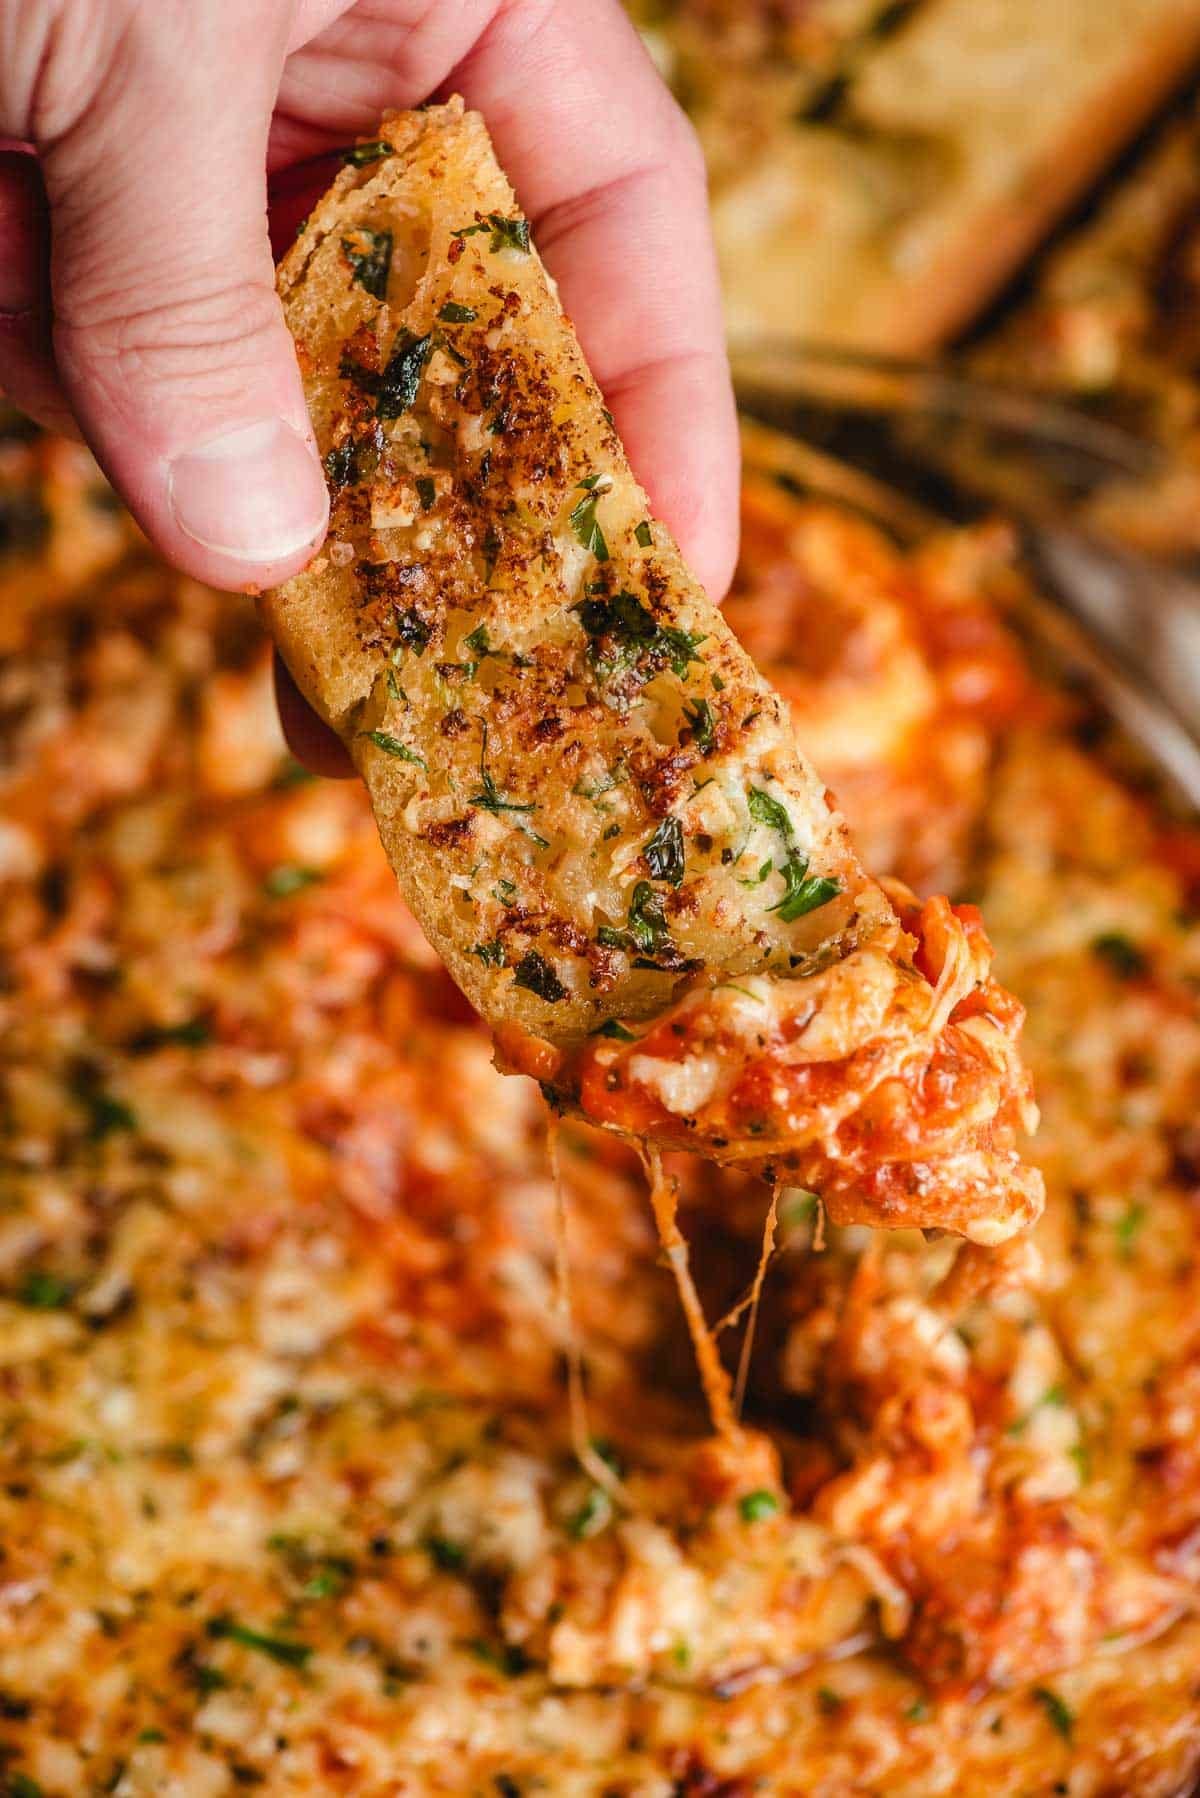 Garlic bread stick being dunked into a pan of lasagna dip.